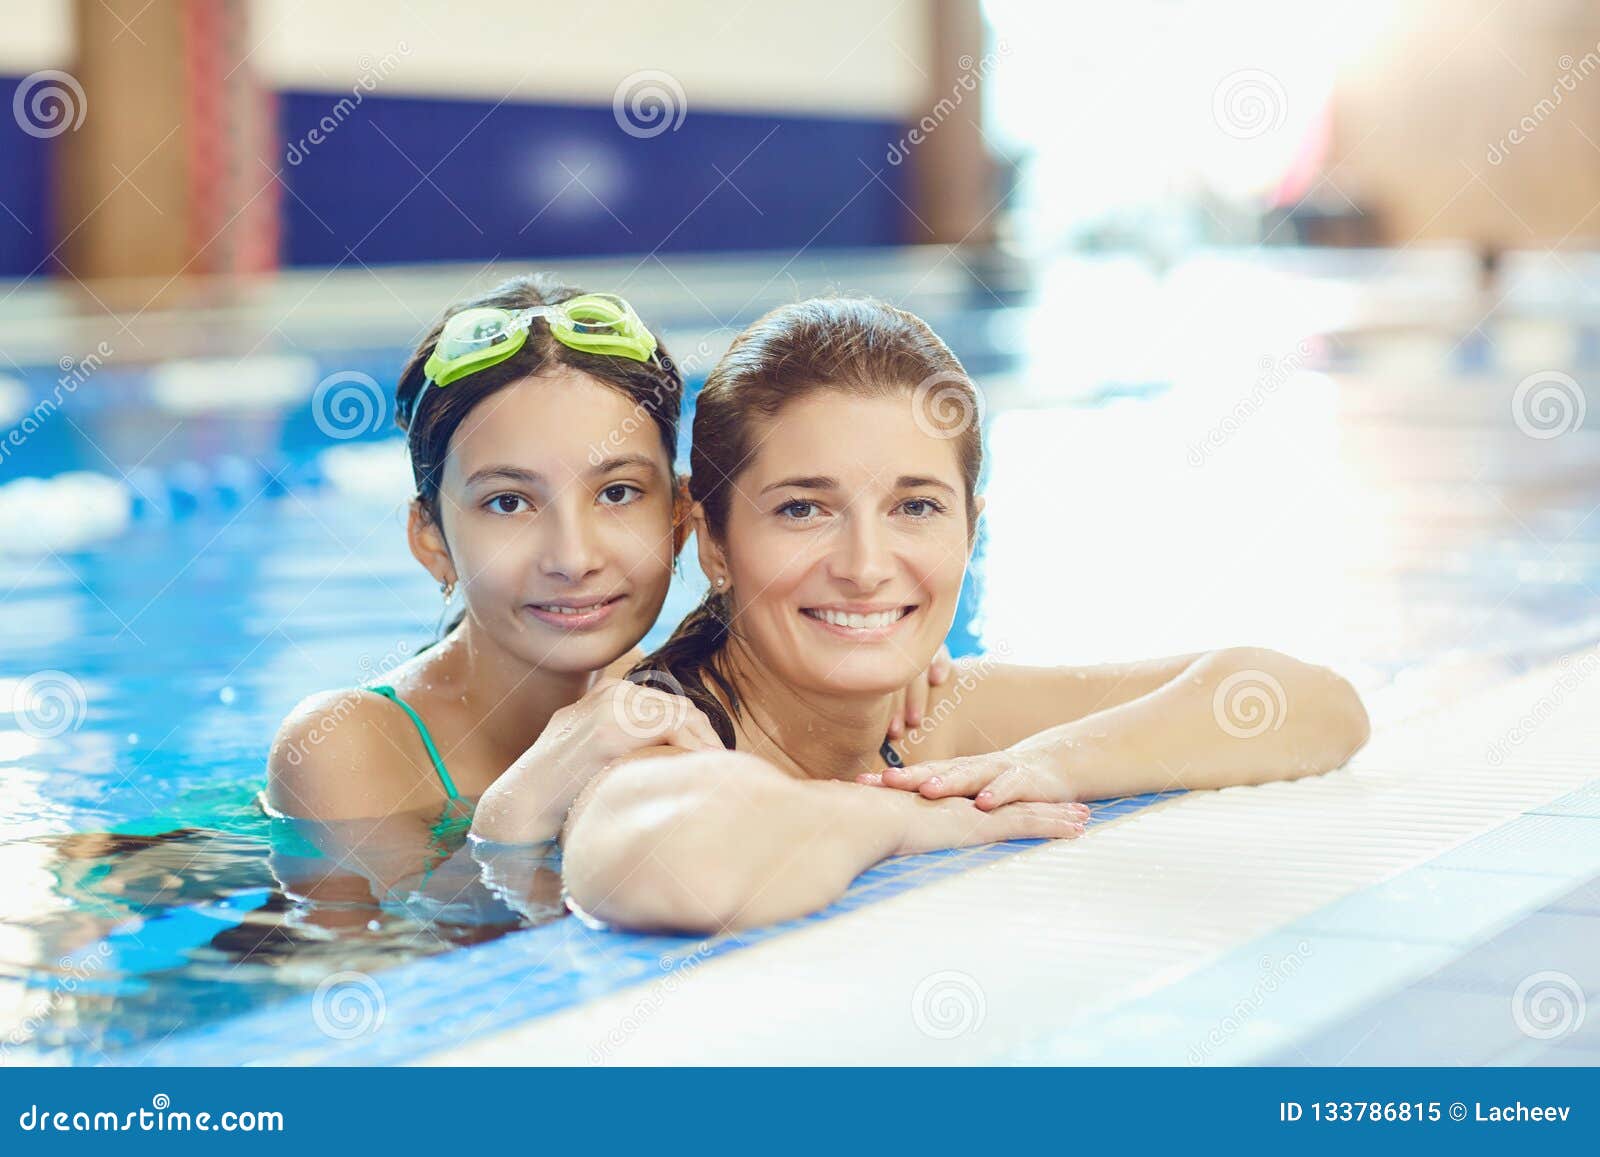 The Daughter And Mother Swim In The Swimming Pool Stock Image Image Of Happiness Healthy